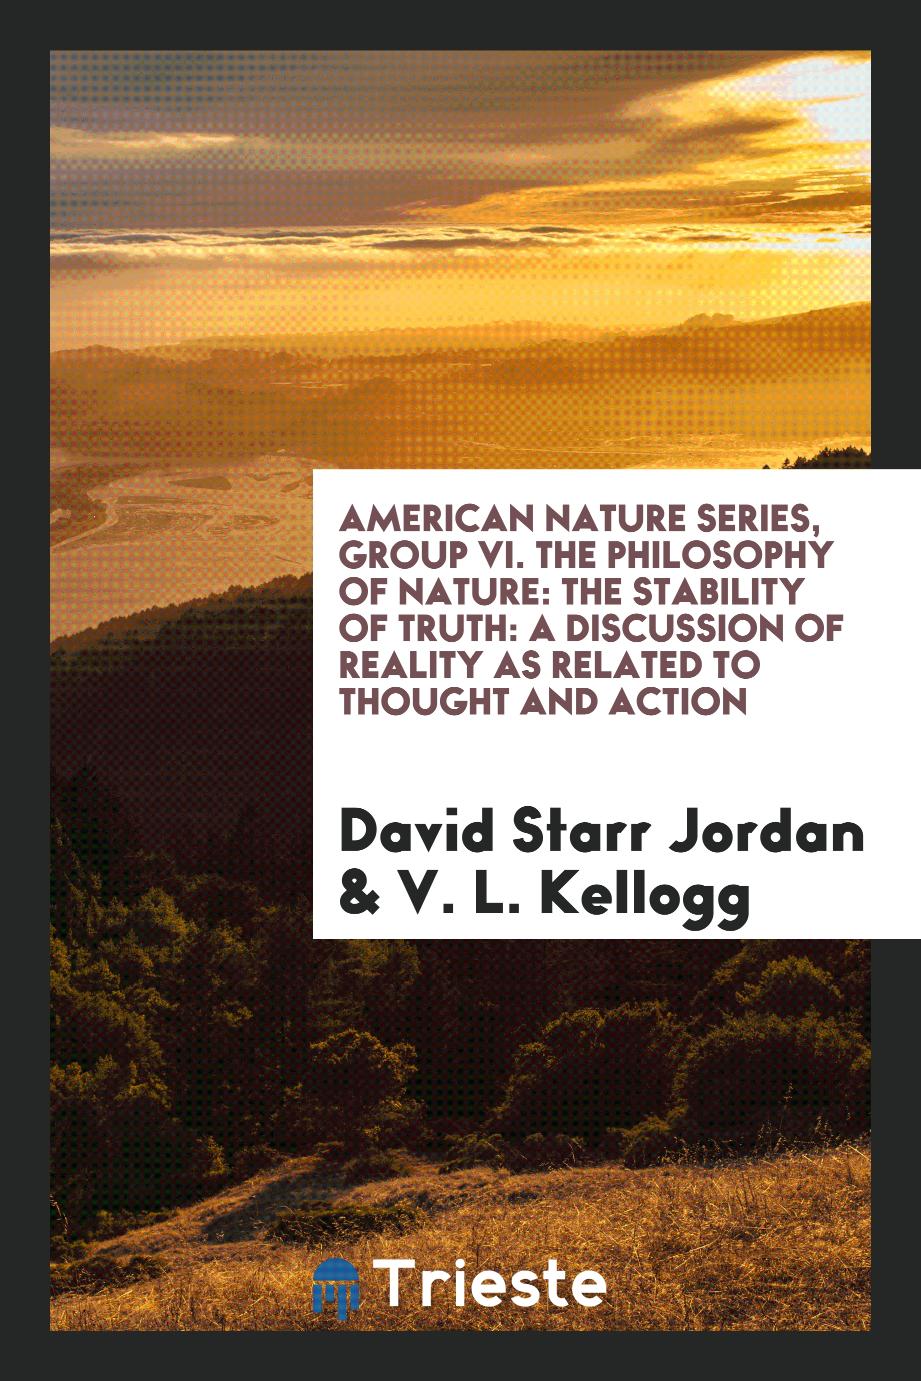 American nature series, Group VI. The Philosophy of nature: The stability of truth: a discussion of reality as related to thought and action